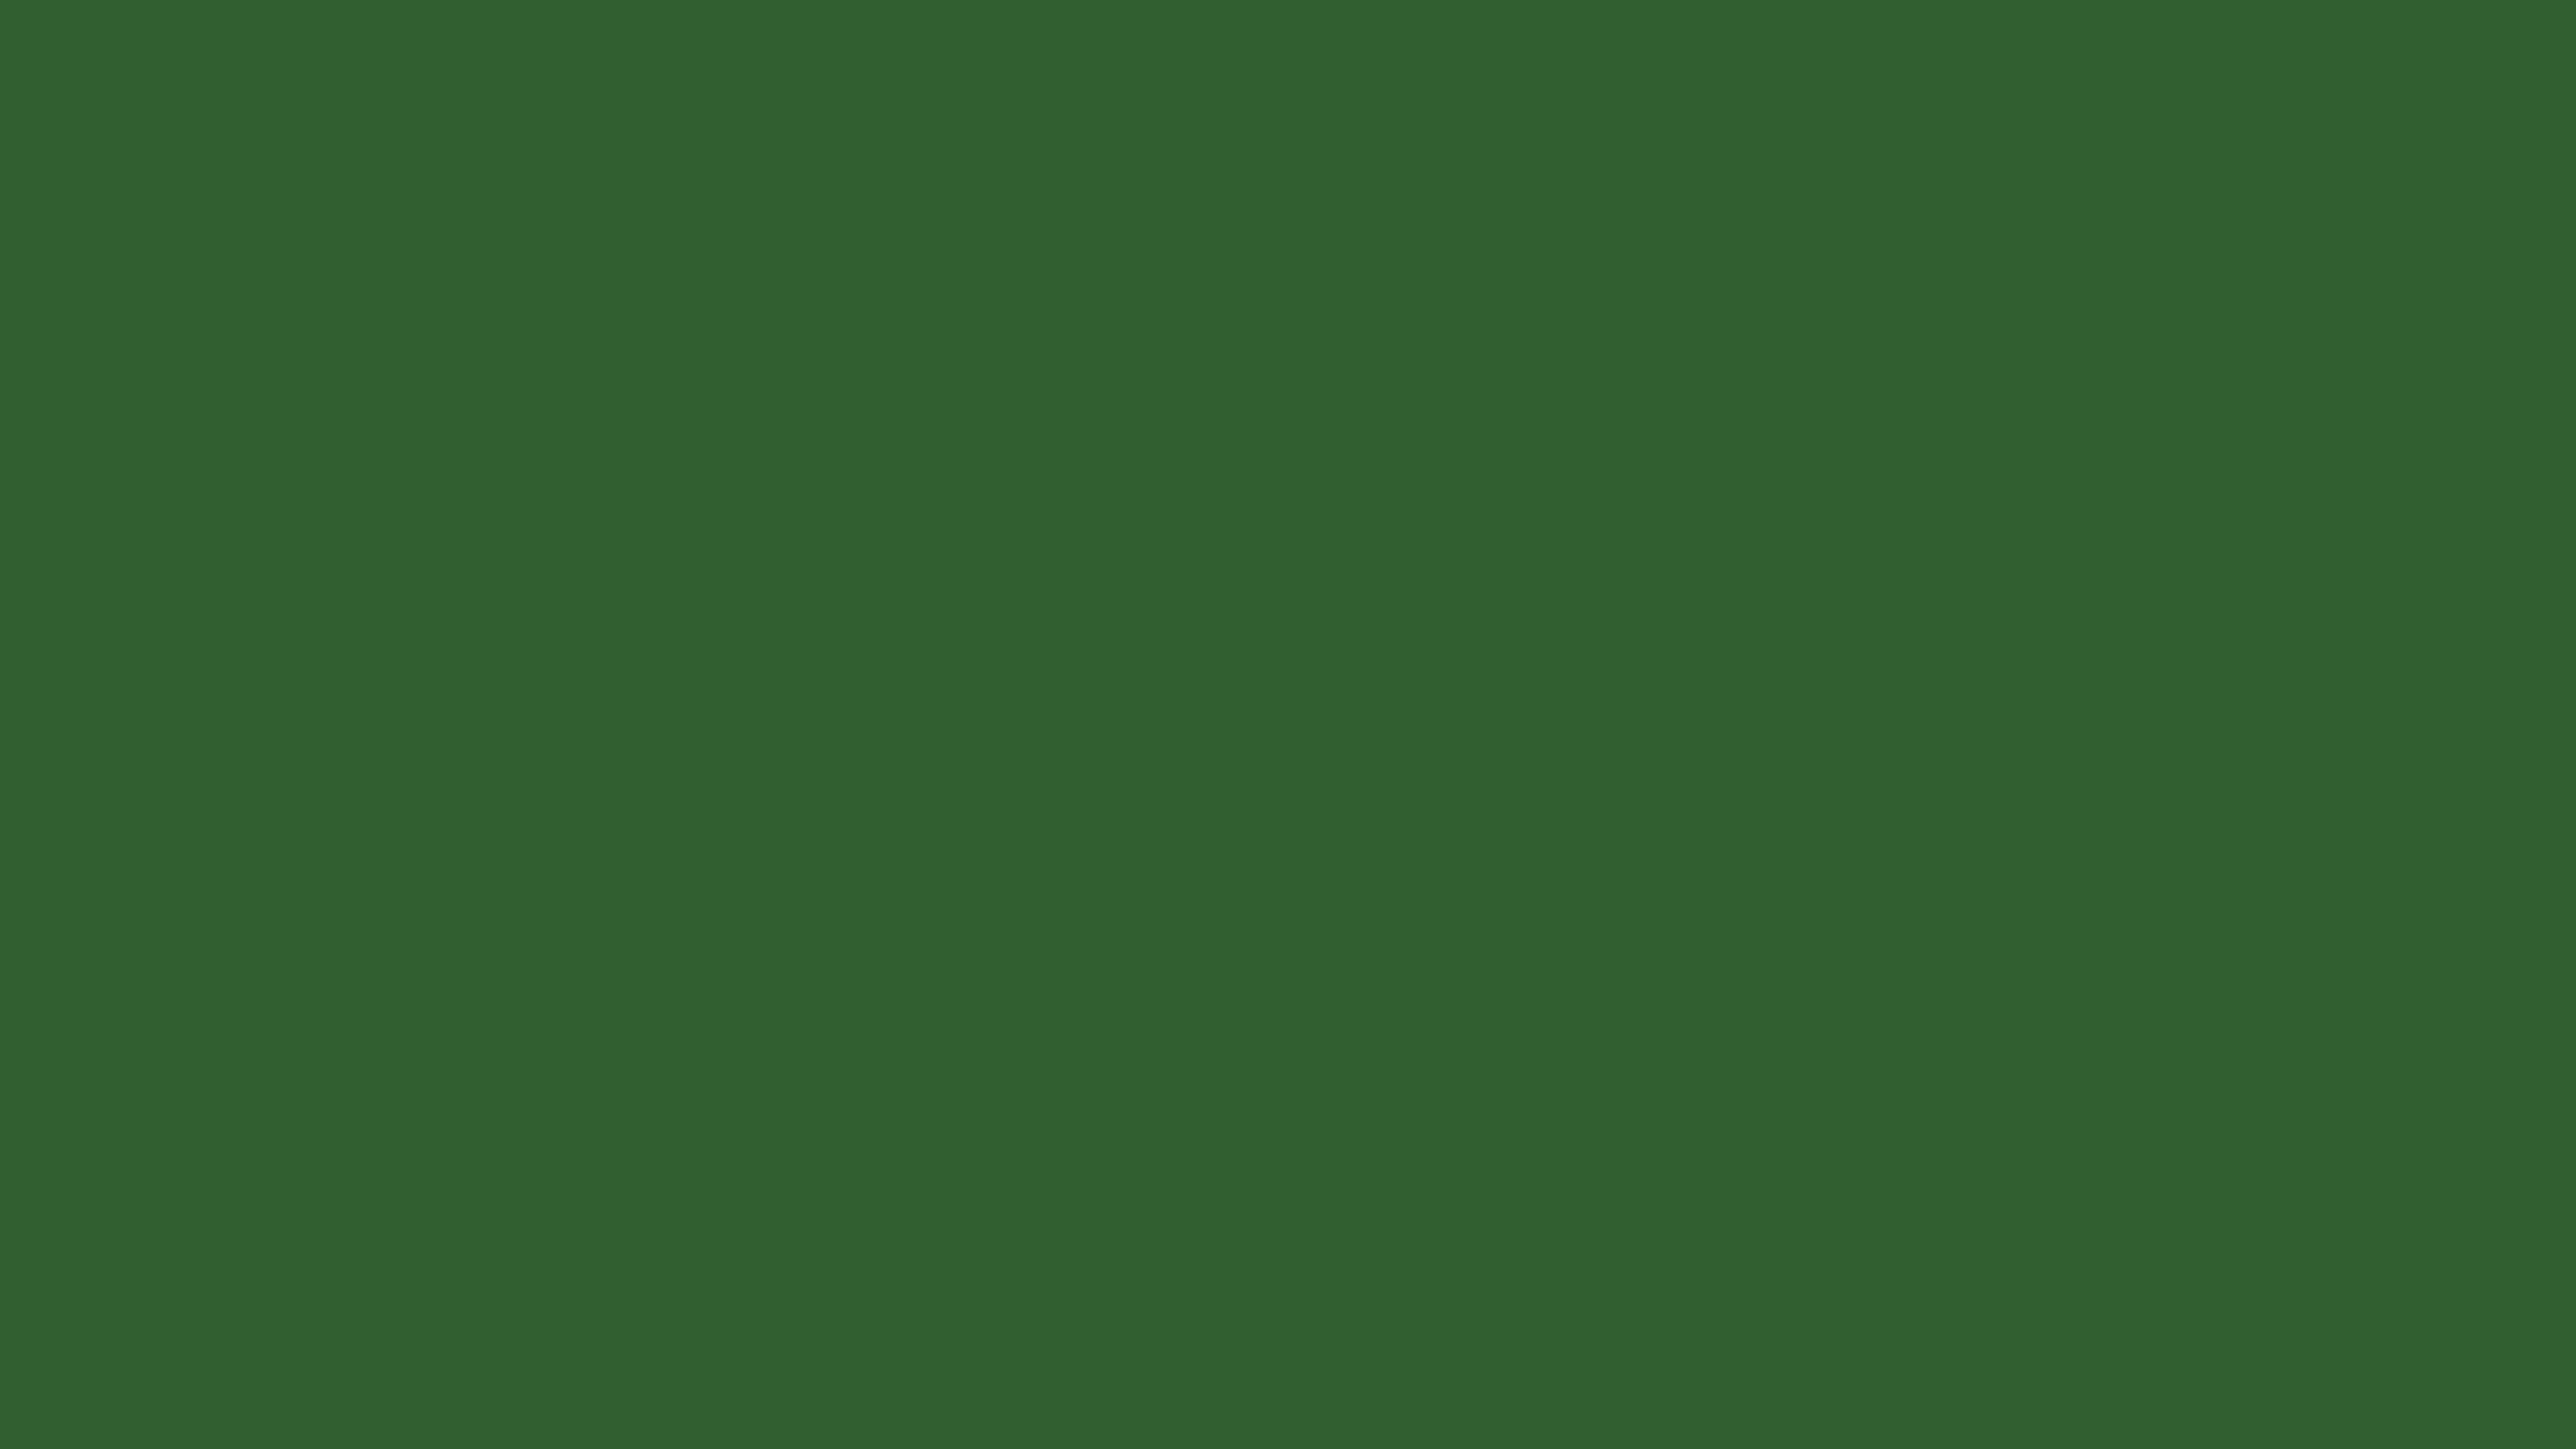 4096x2304 Mughal Green Solid Color Background